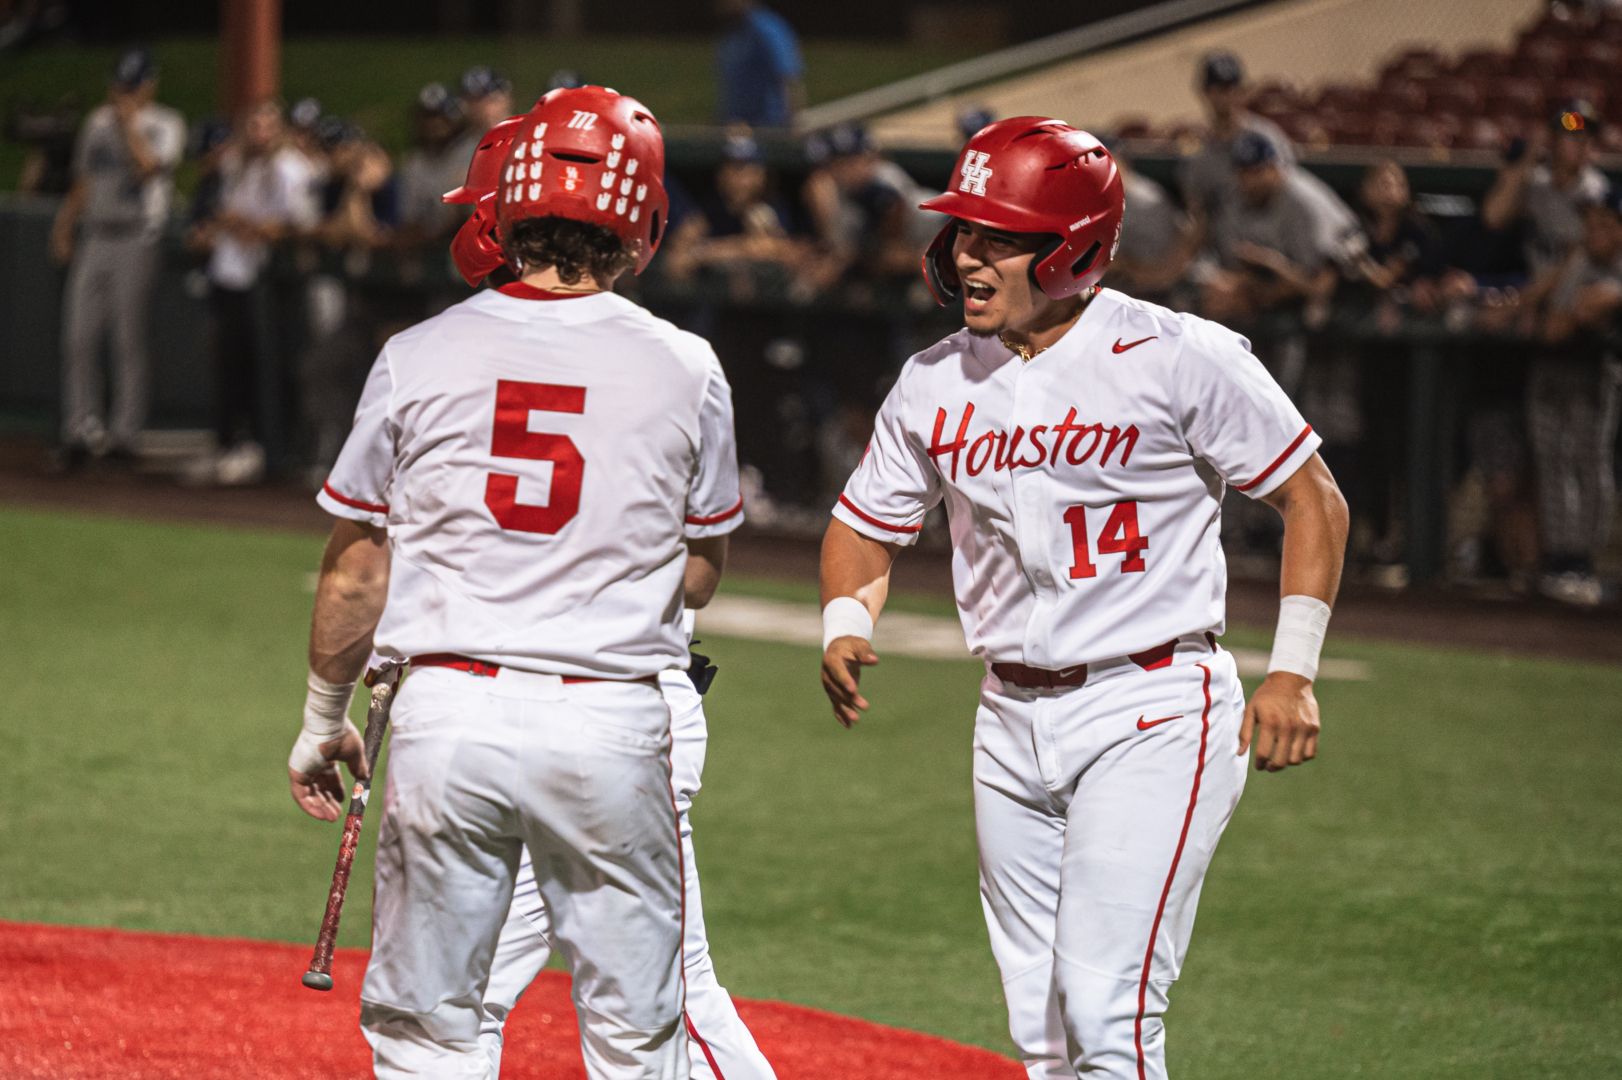 UH baseball took two of three on the road at Wichita State over the weekend to improve to 17-15 overall. | Xavier Rosales/The Cougar